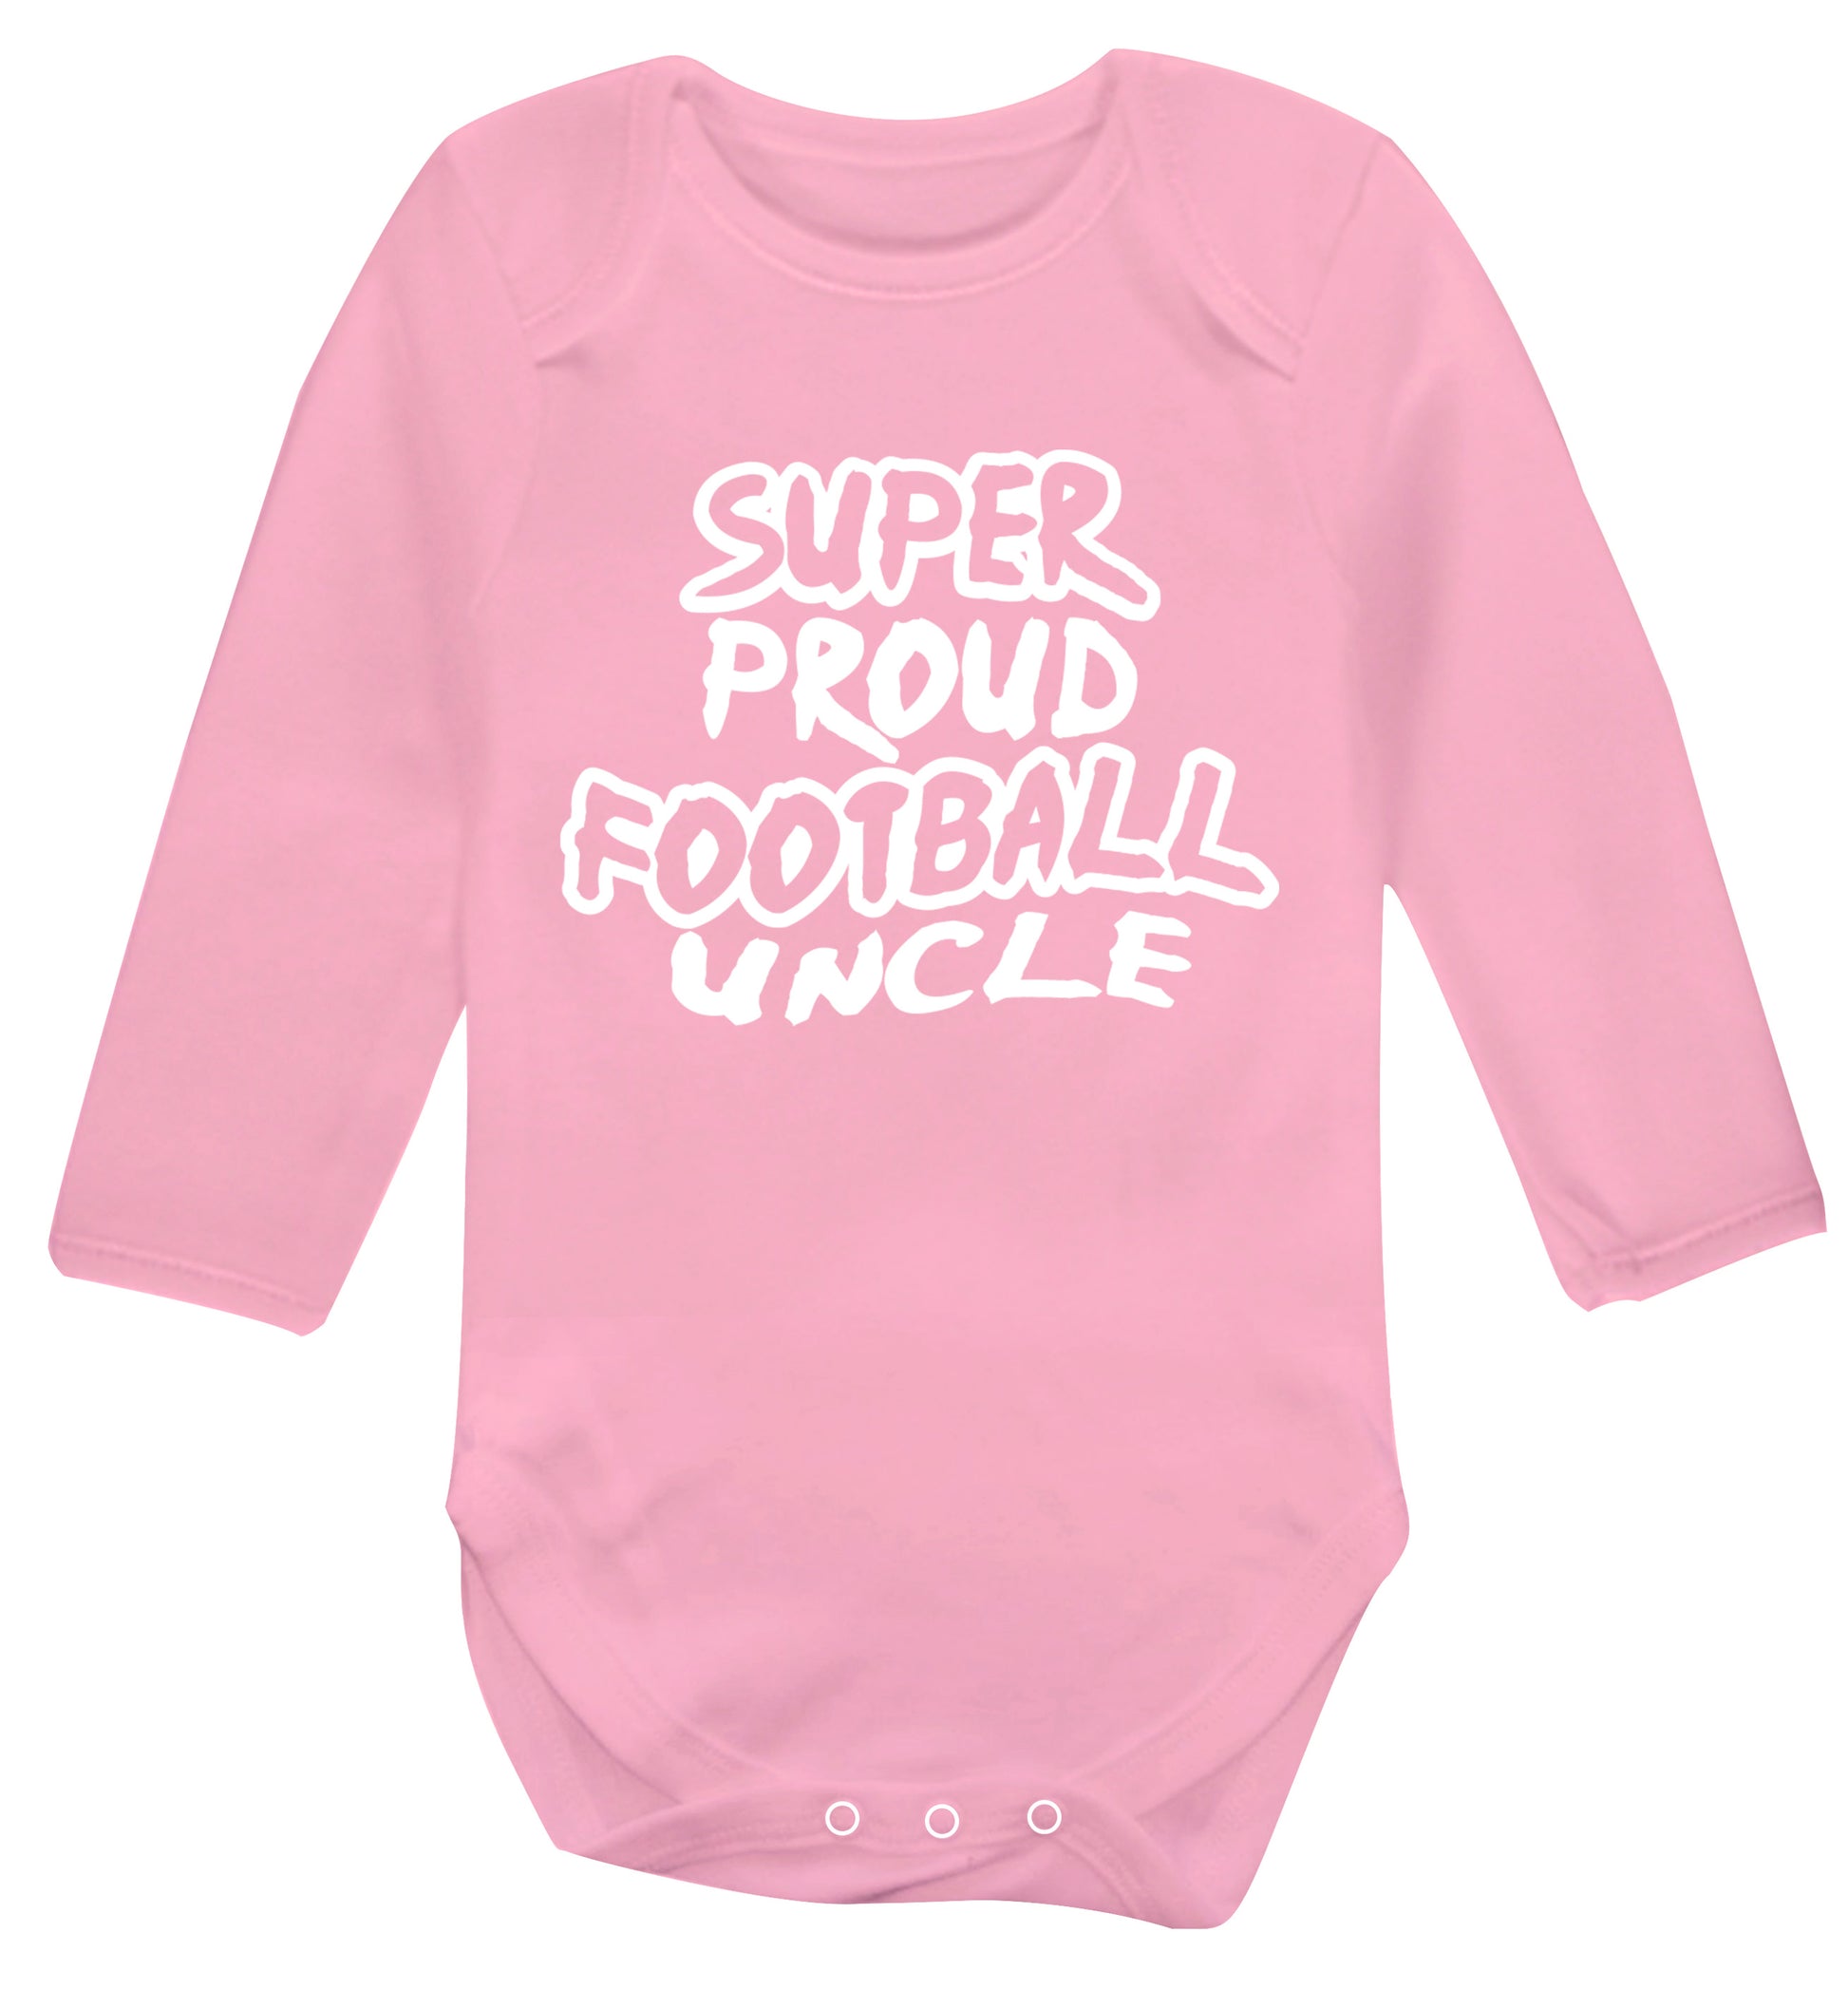 Super proud football uncle Baby Vest long sleeved pale pink 6-12 months